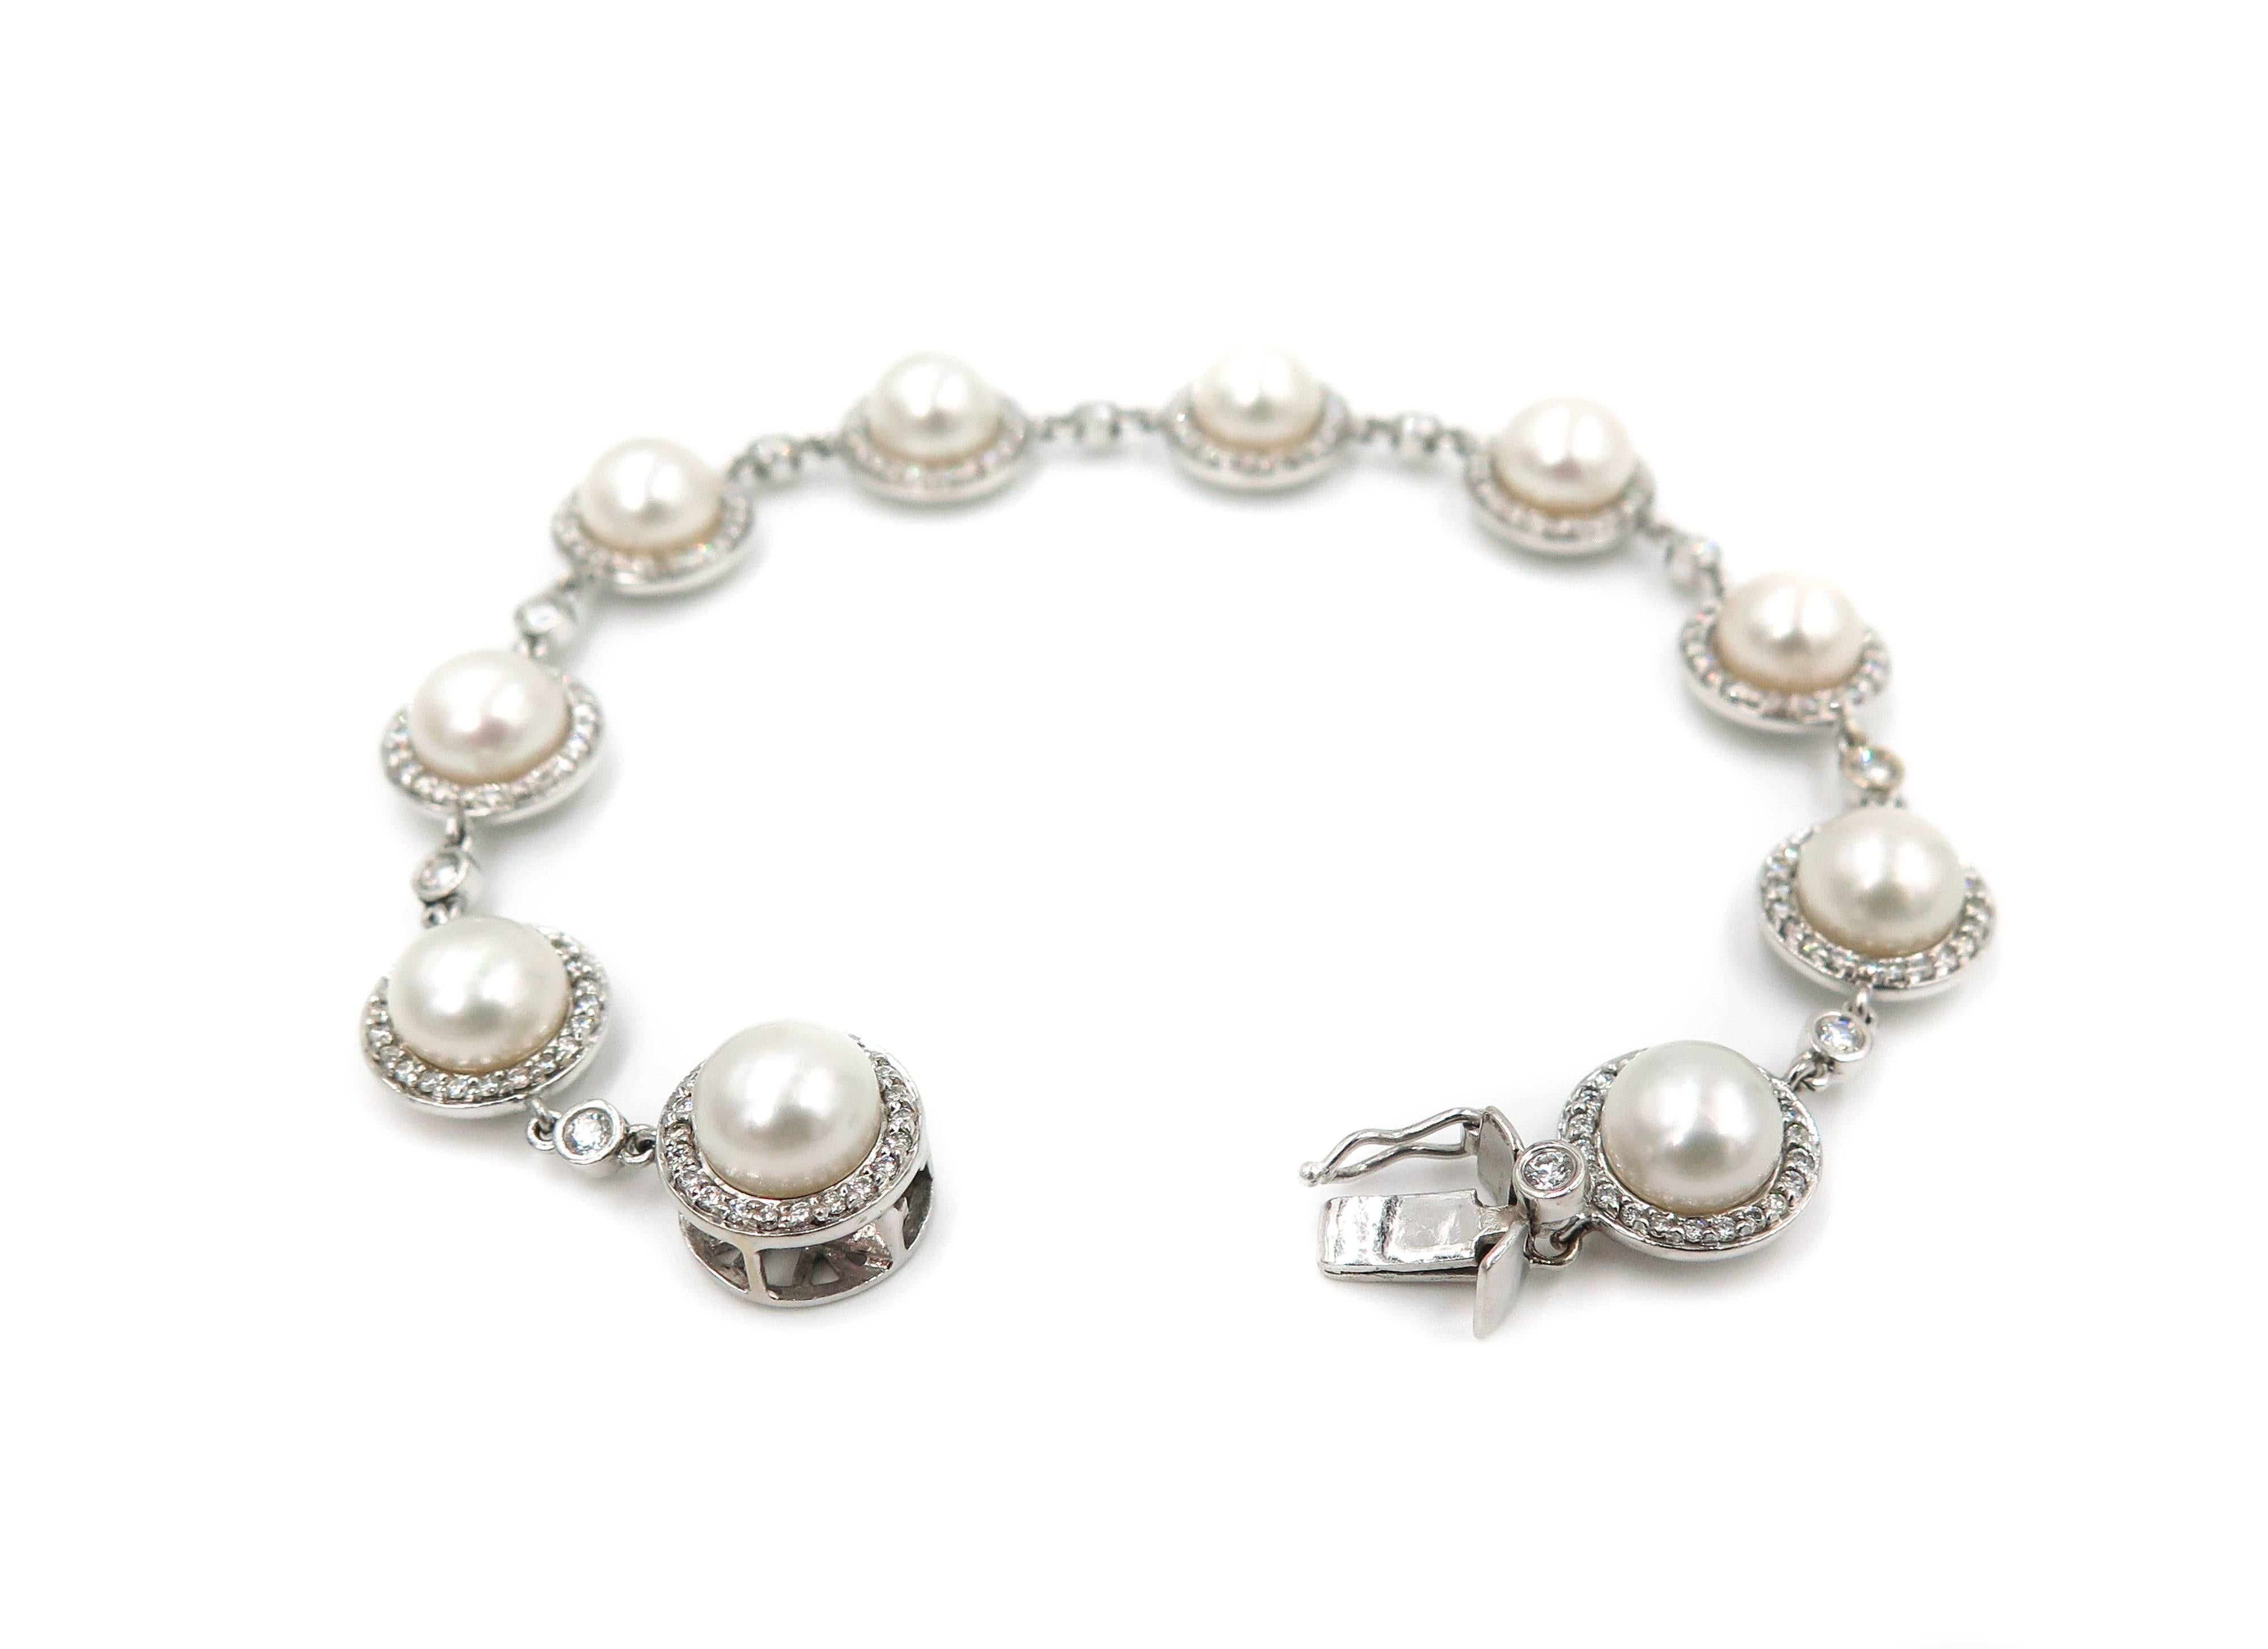 Neoclassical Pearls and Diamond White Gold Bracelet